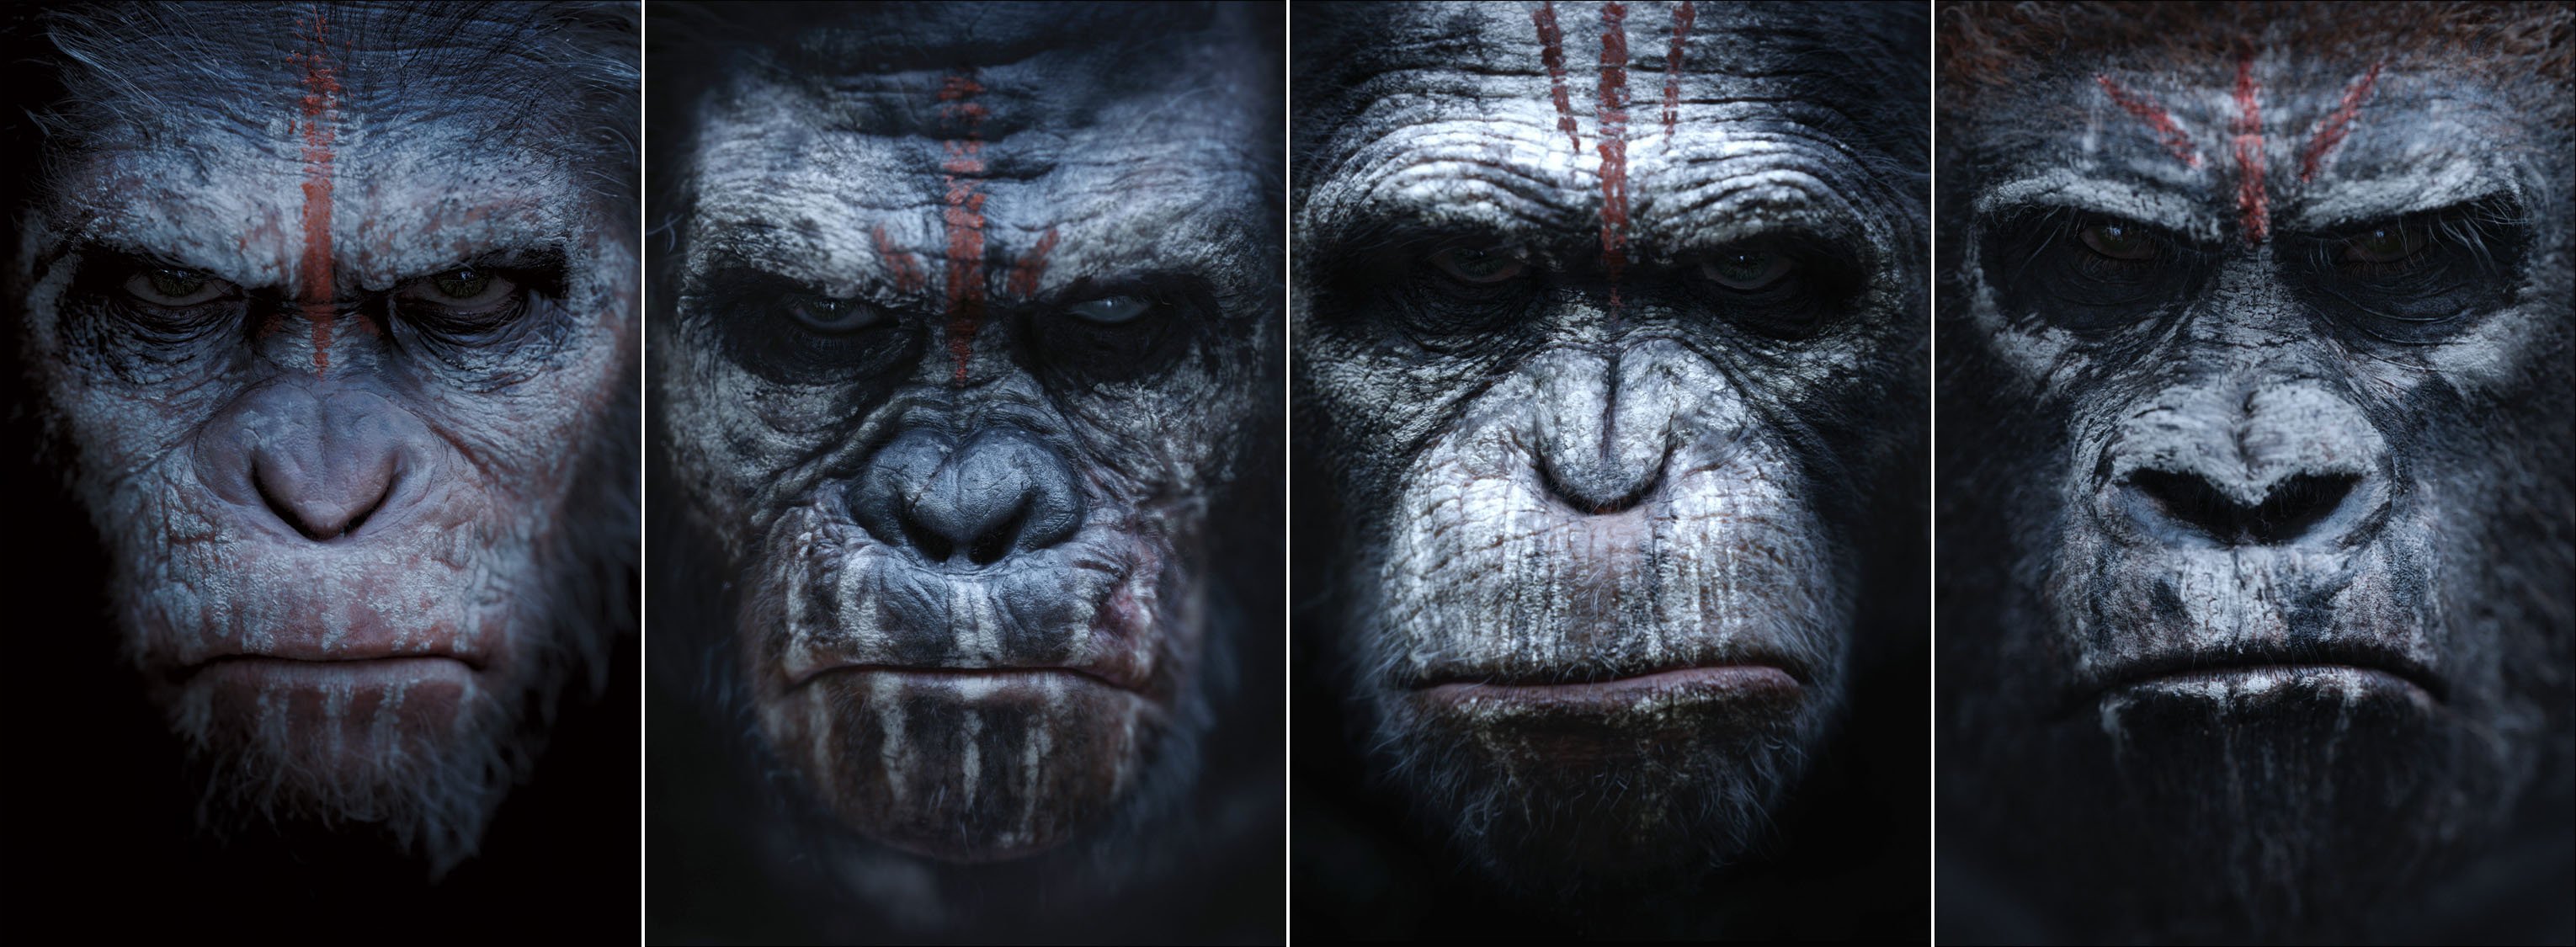 dawn of the apes, Action, Drama, Sci fi, Dawn,